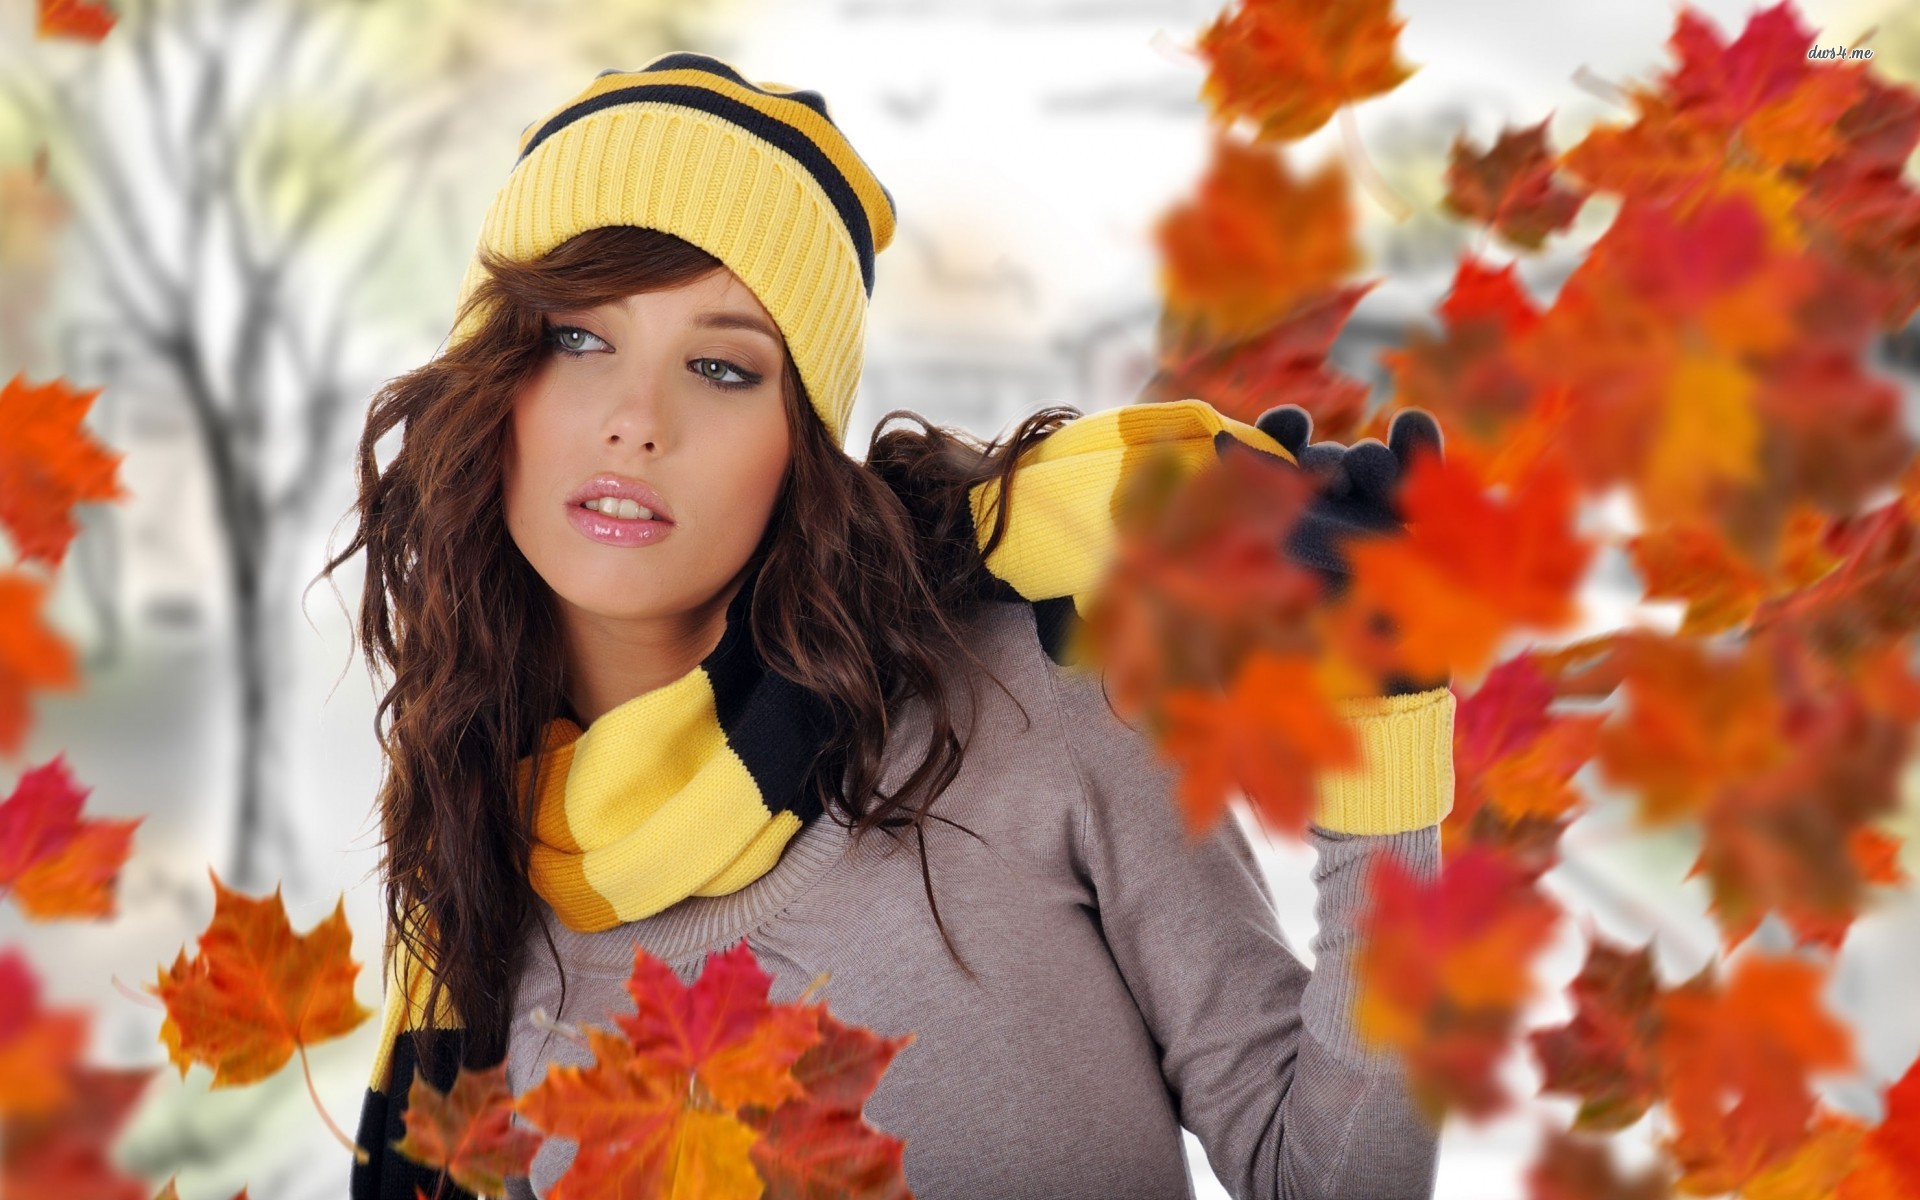 Autumn leaves fall around the girl wallpapers and images - wallpapers, pictures, photos